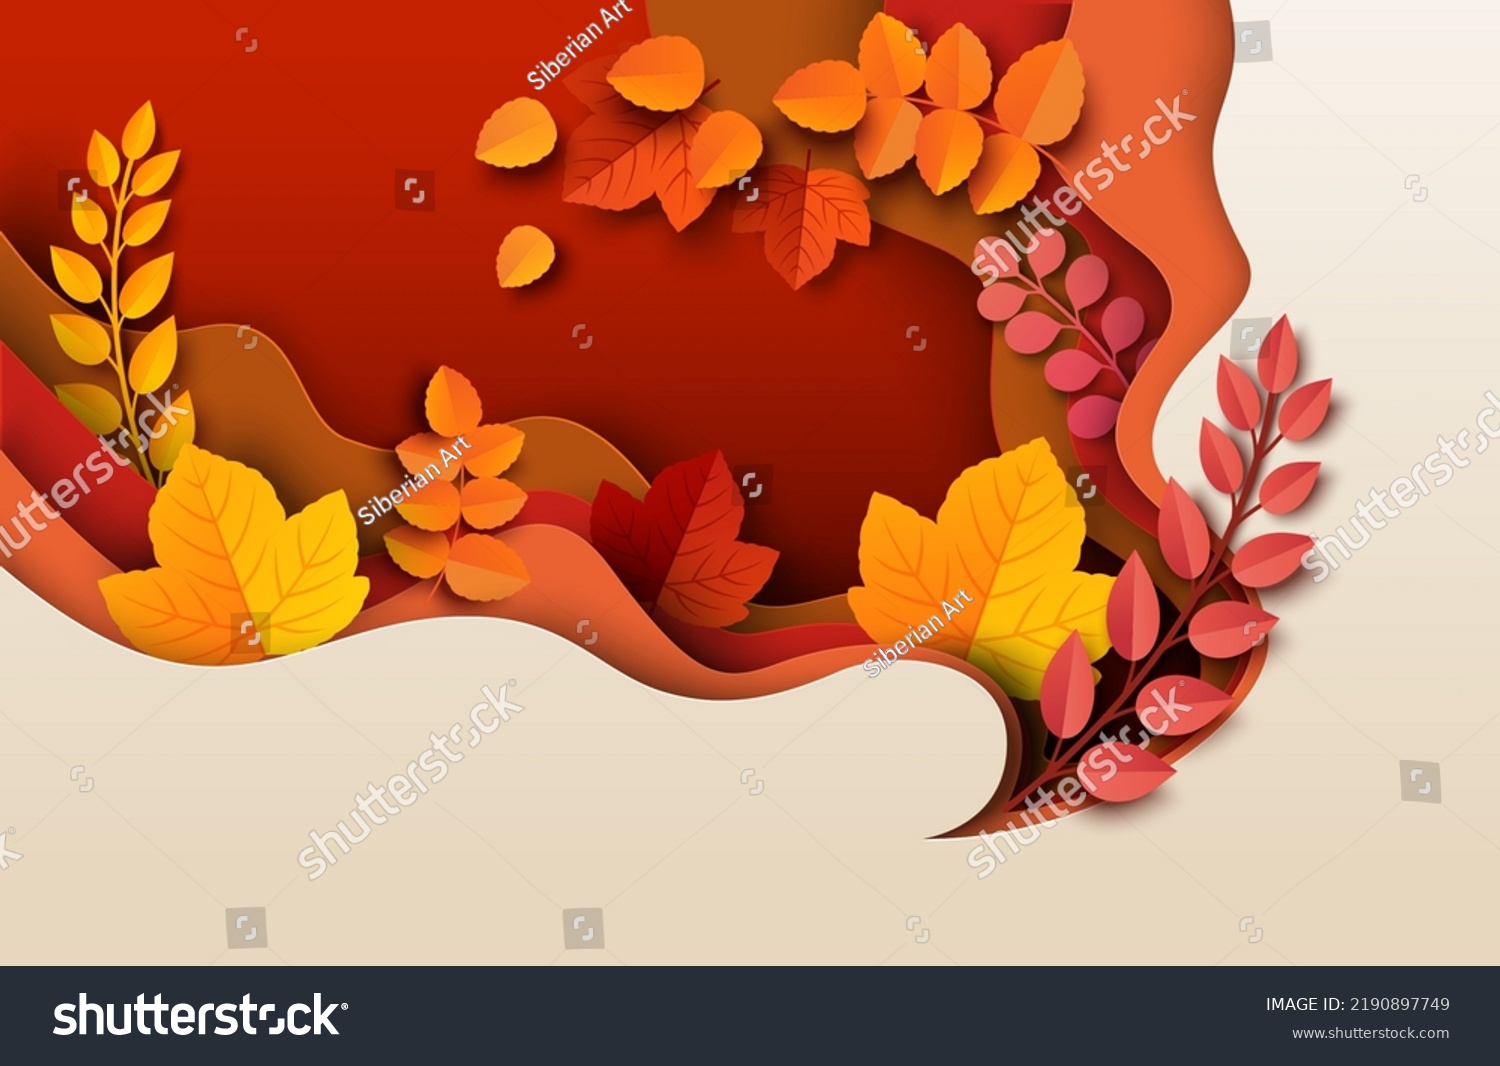 SVG of Autumn paper cut background. Fall origami art style poster with tree leaf and branch illustration. Creative foliage decoration with [lace fro advertising or promotion text svg